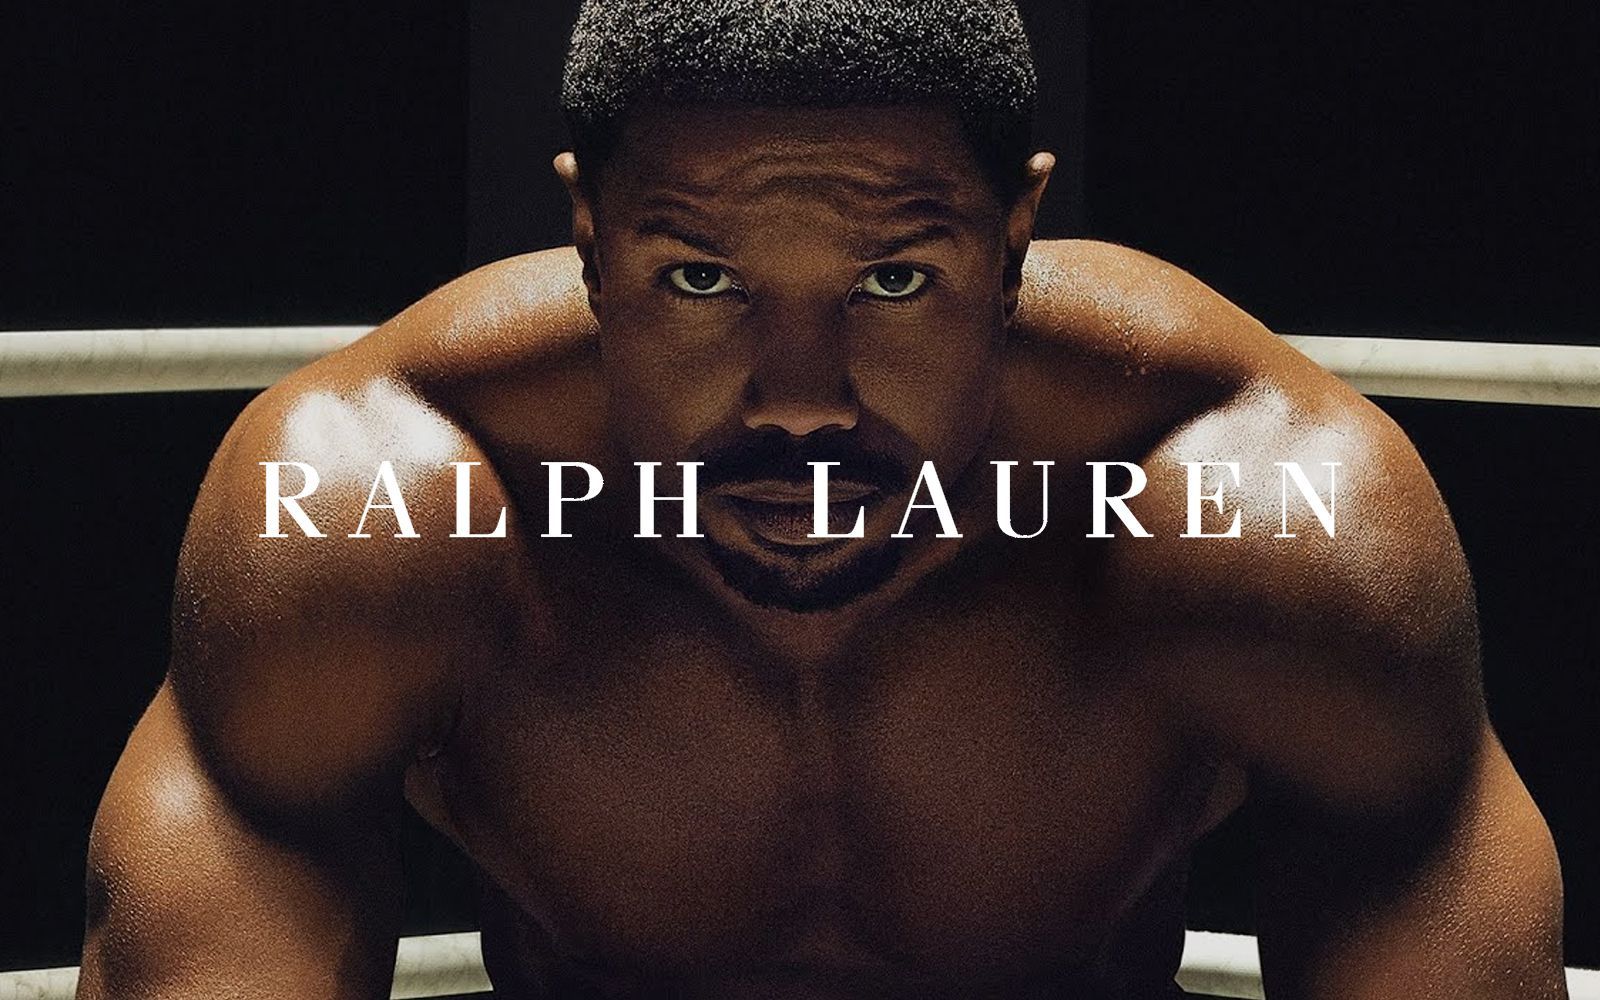 Ralph Lauren unveils capsule collection inspired by the new Creed III